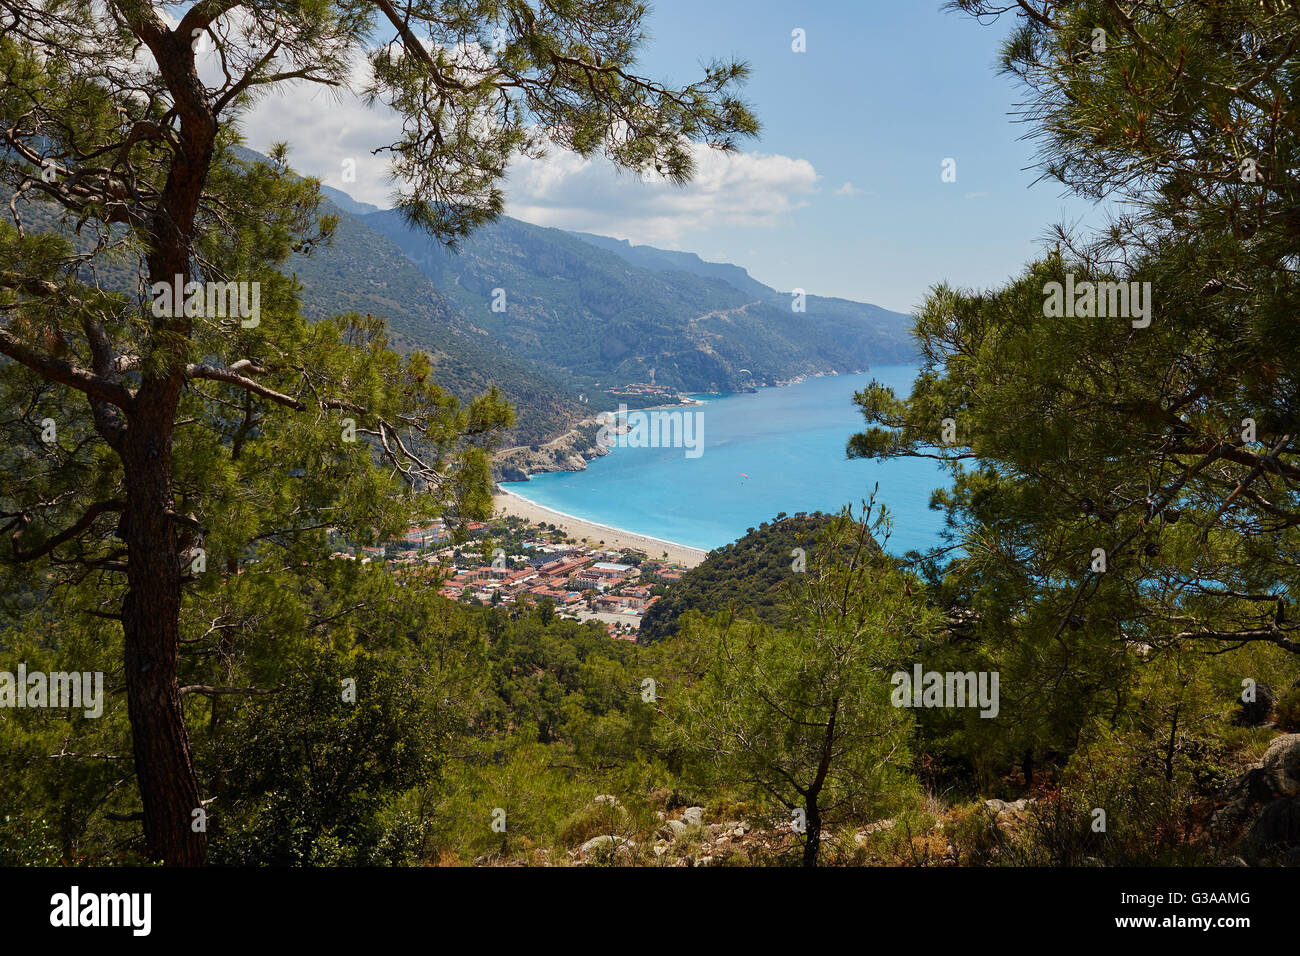 Elevated view of Oludeniz town and Belcekiz beach from the surrounding mountainside in Turkey. Stock Photo